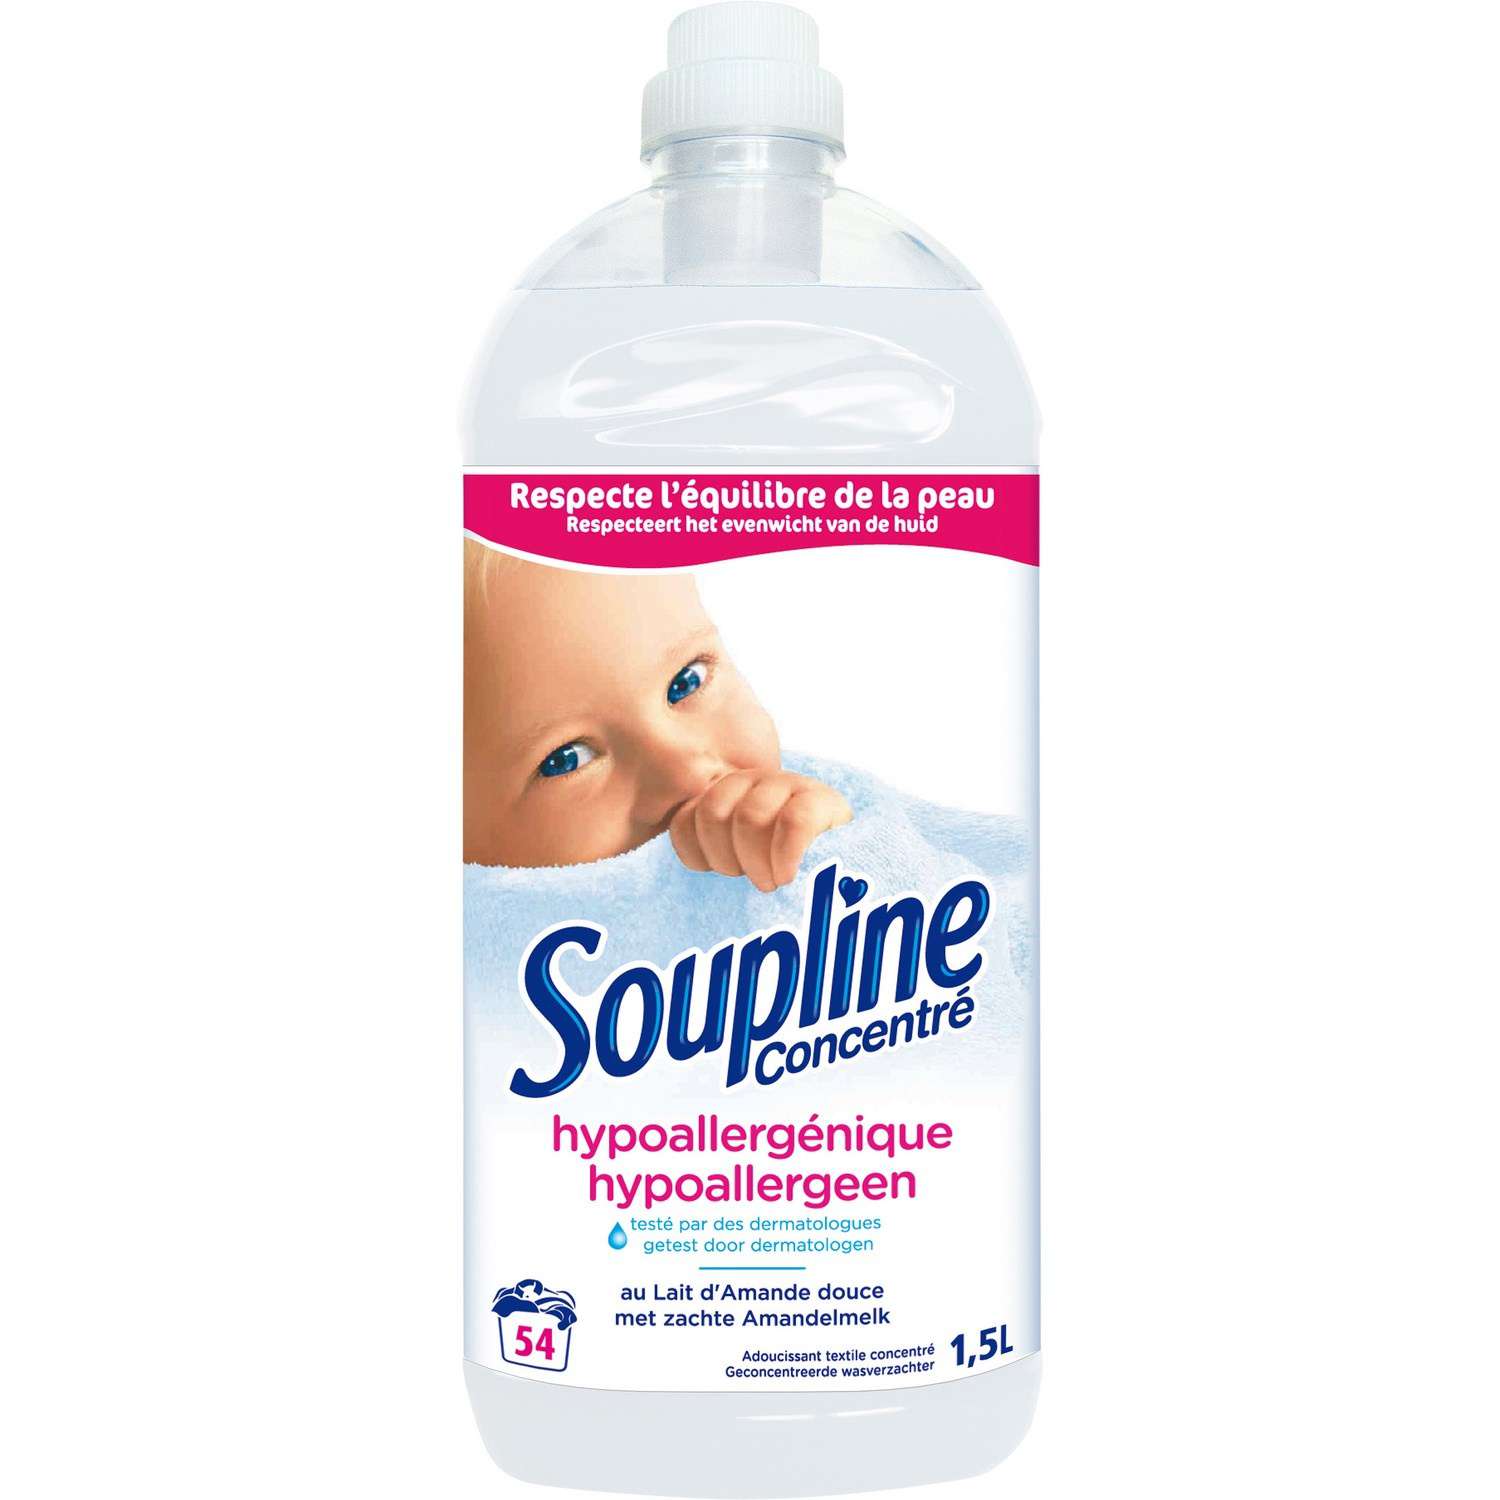 Soupline fabric softener hypoallergenic concentrated 1.3L